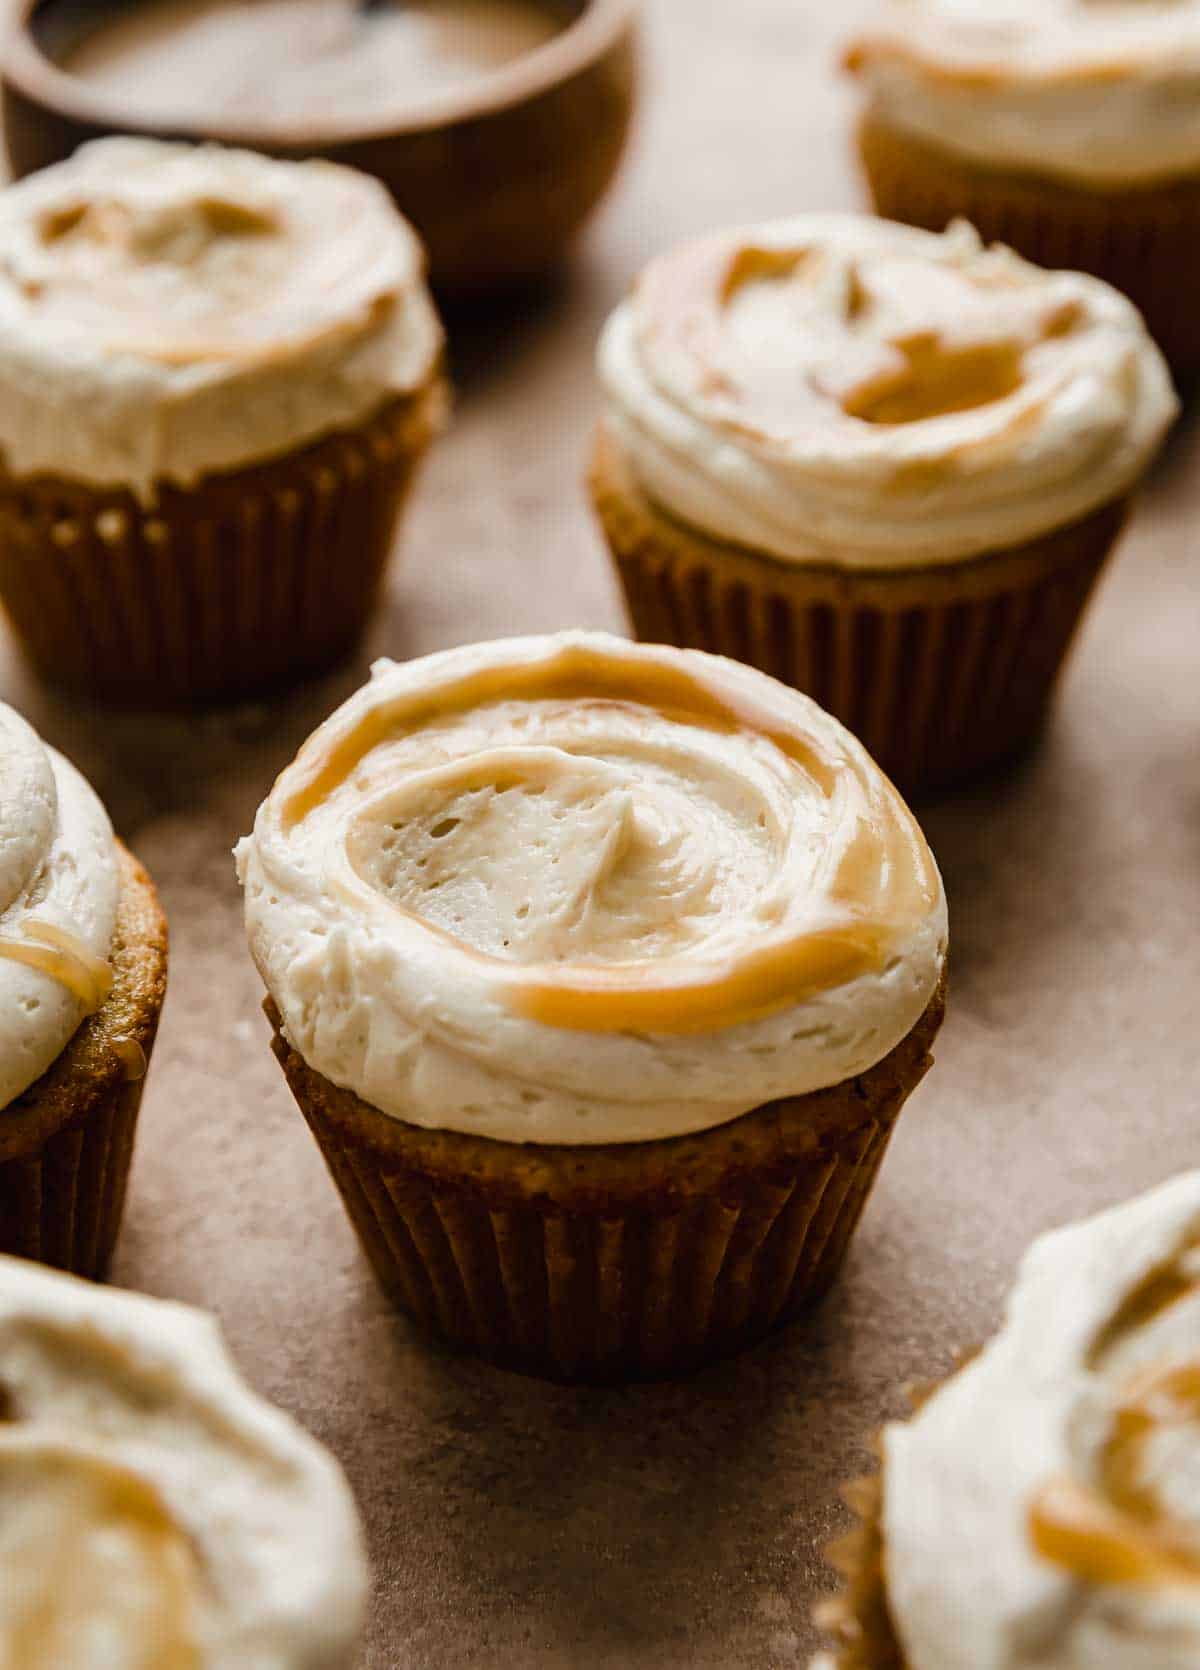 A Butterscotch frosting covered brown butter cupcake on a light brown background.